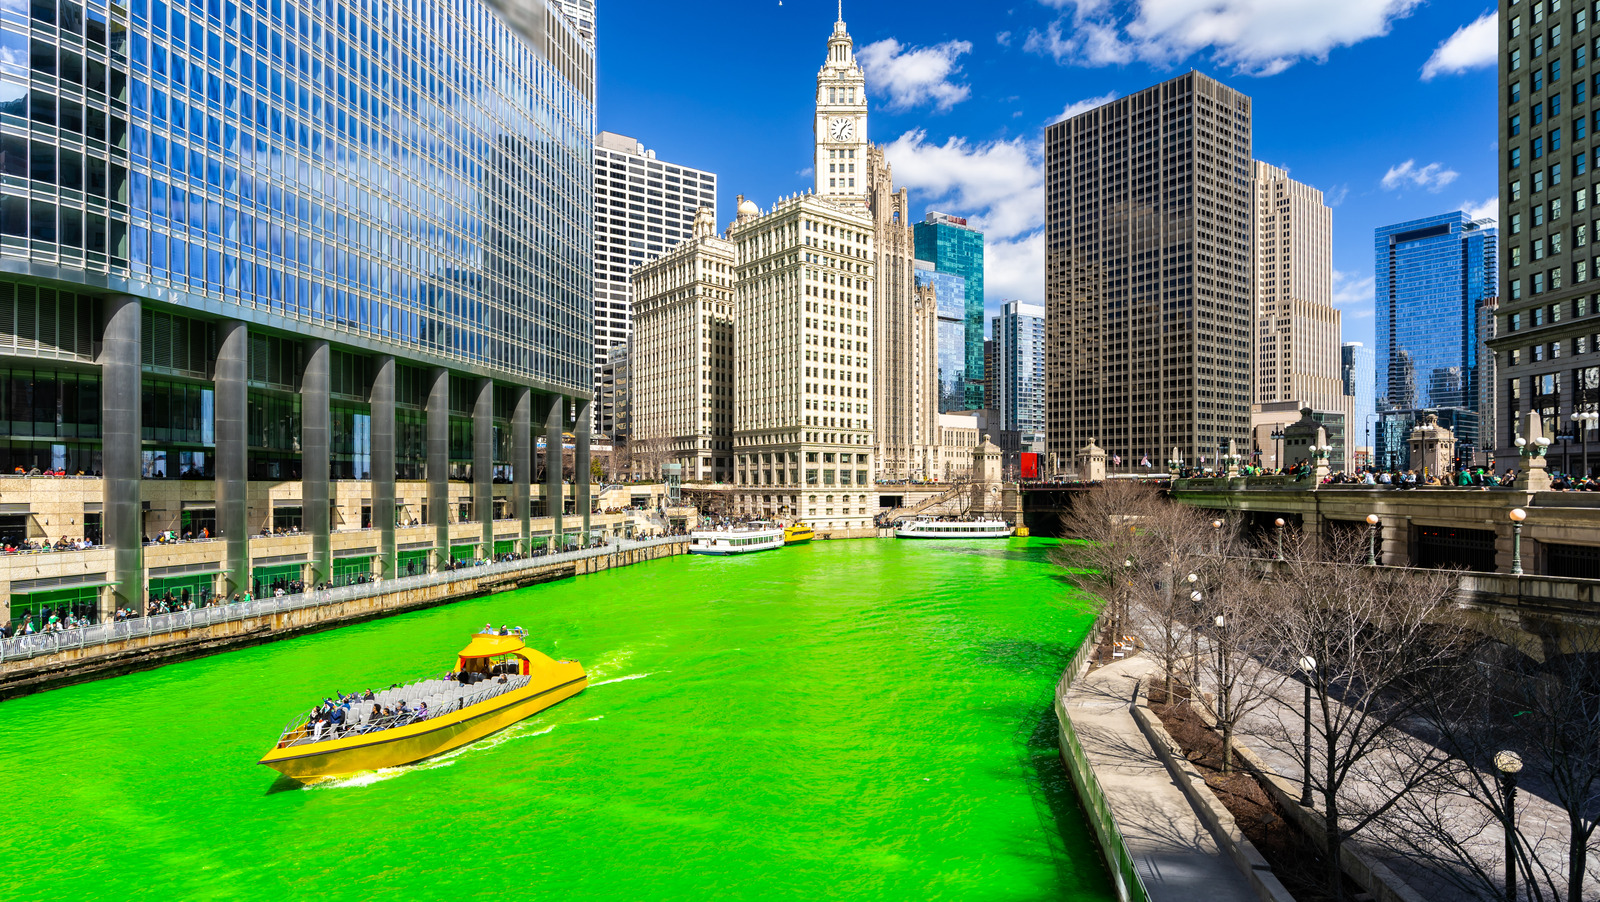 How The Annual Dyeing Of The Chicago River Became A St Patricks Day Tradition 0559